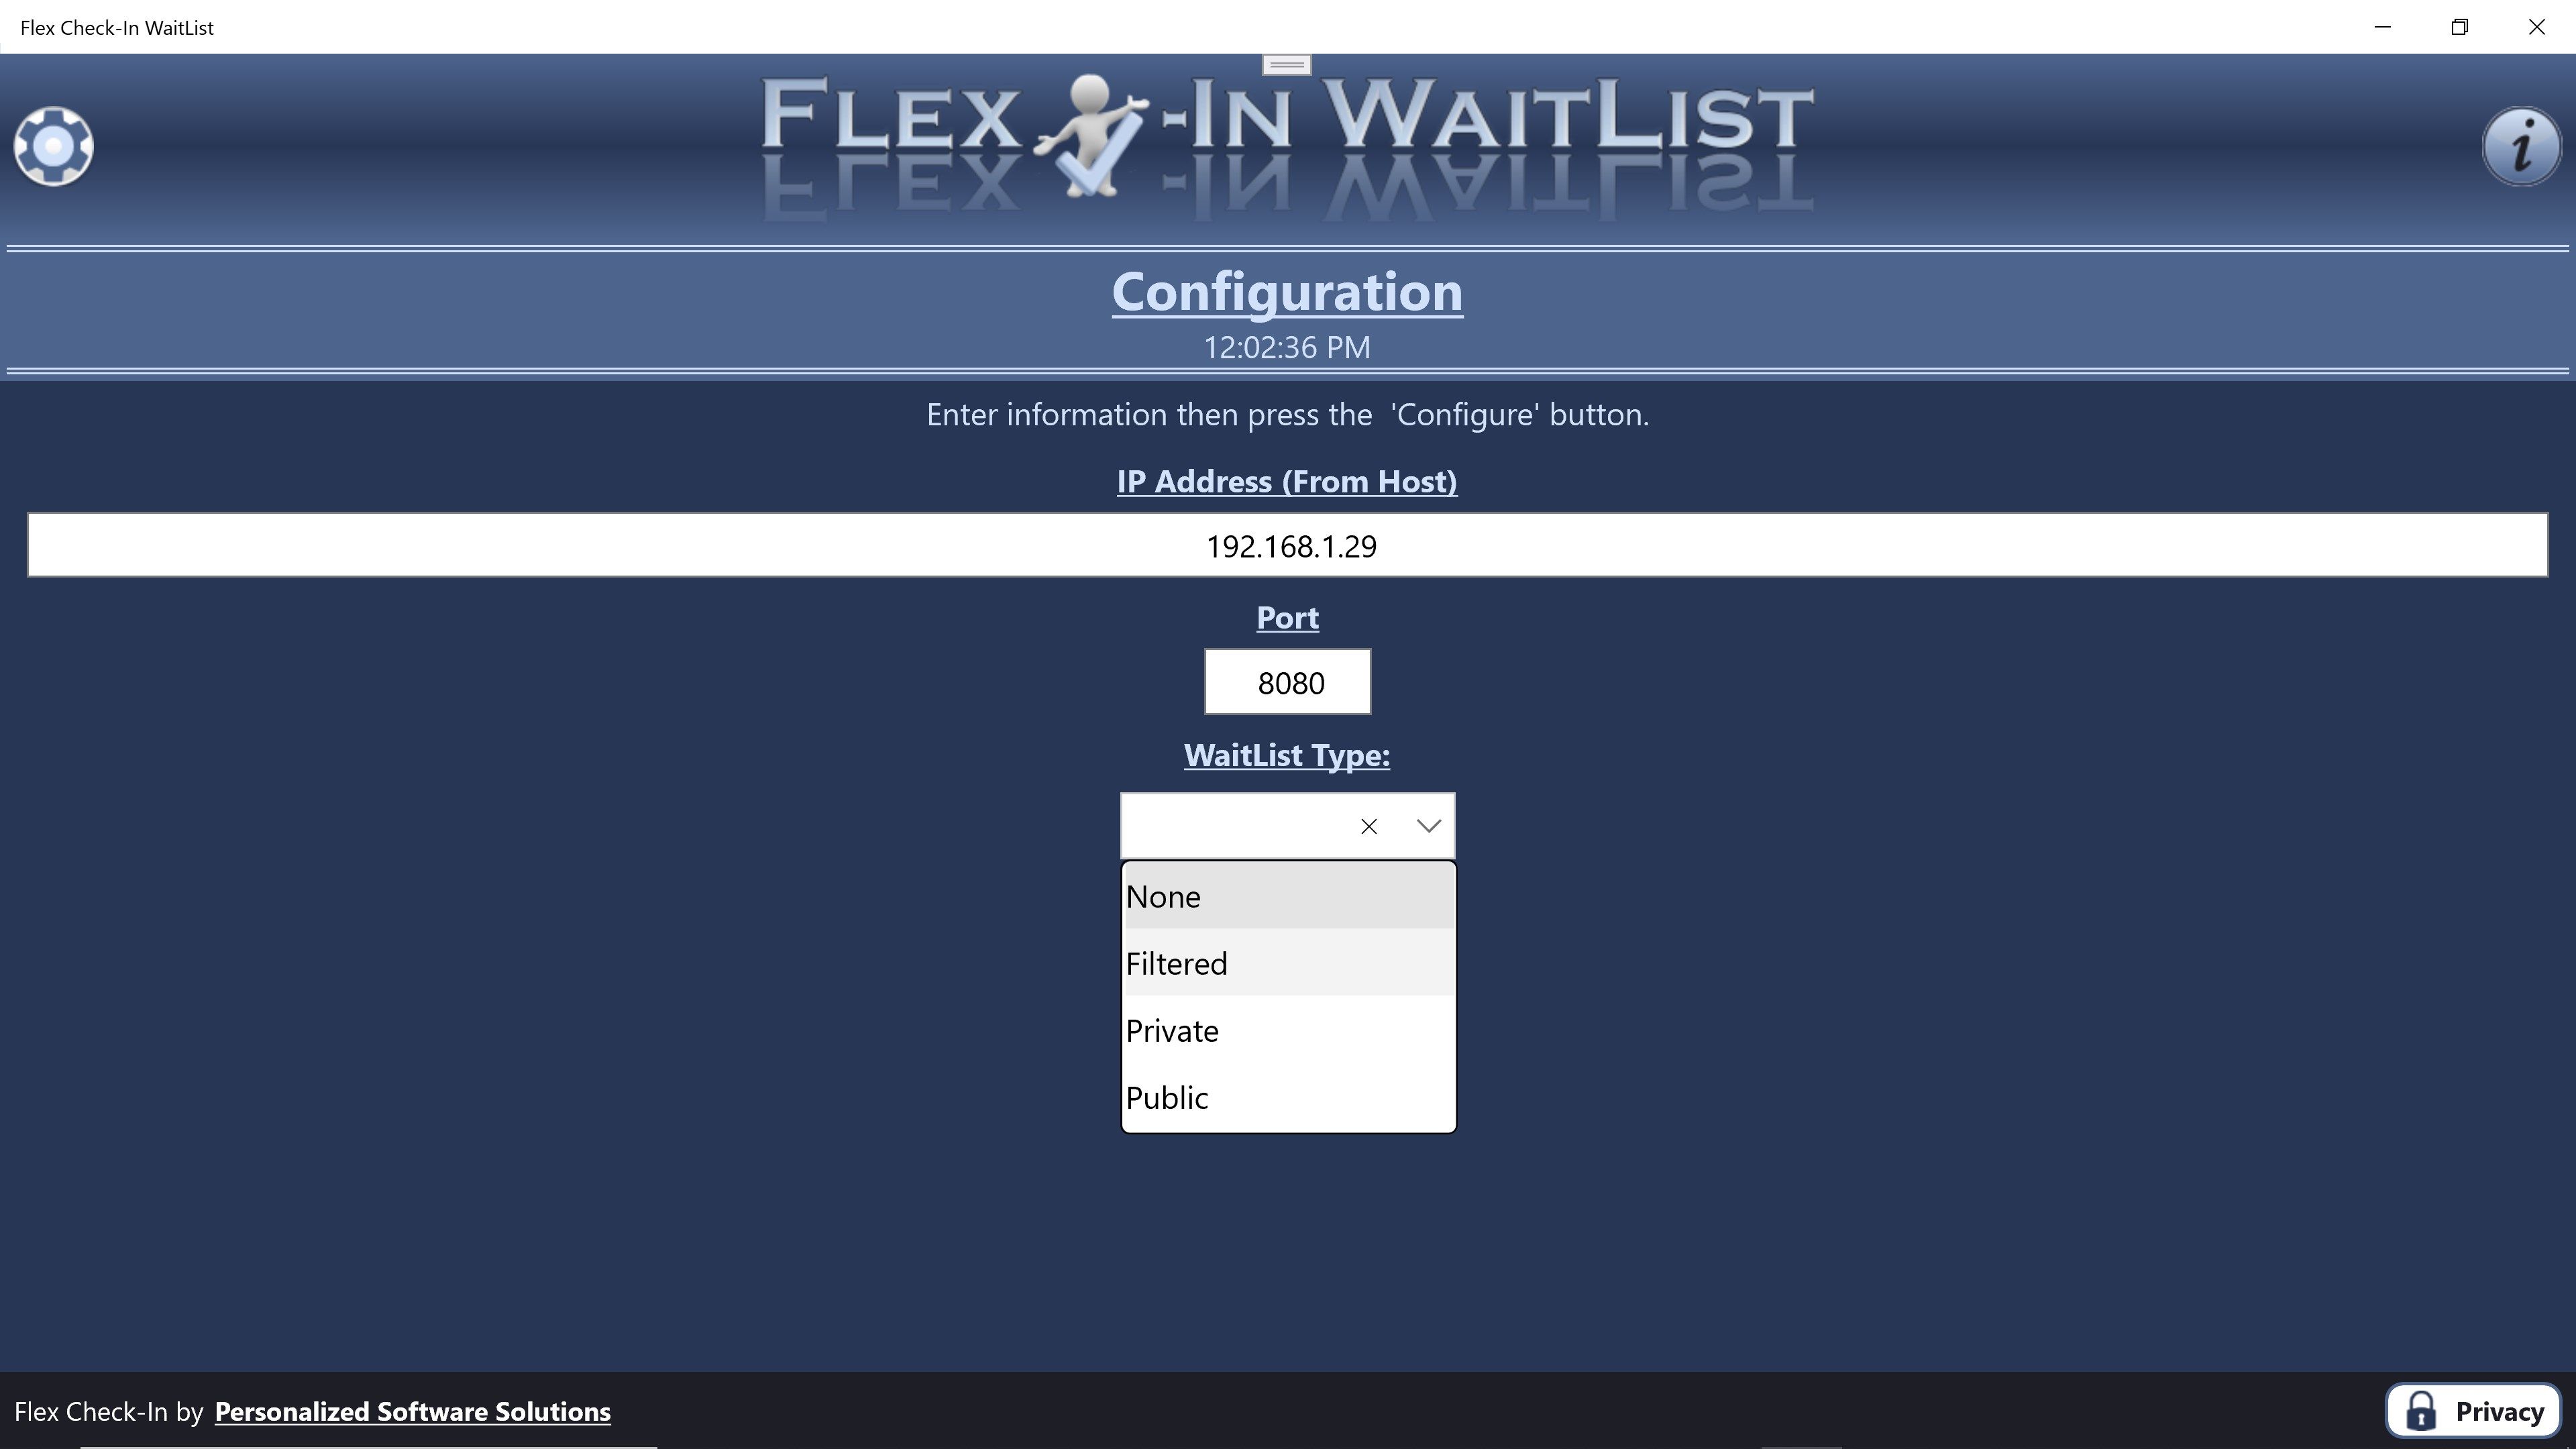 Enter IP address and port from Flex Check-in Host application and select your WaitList type.